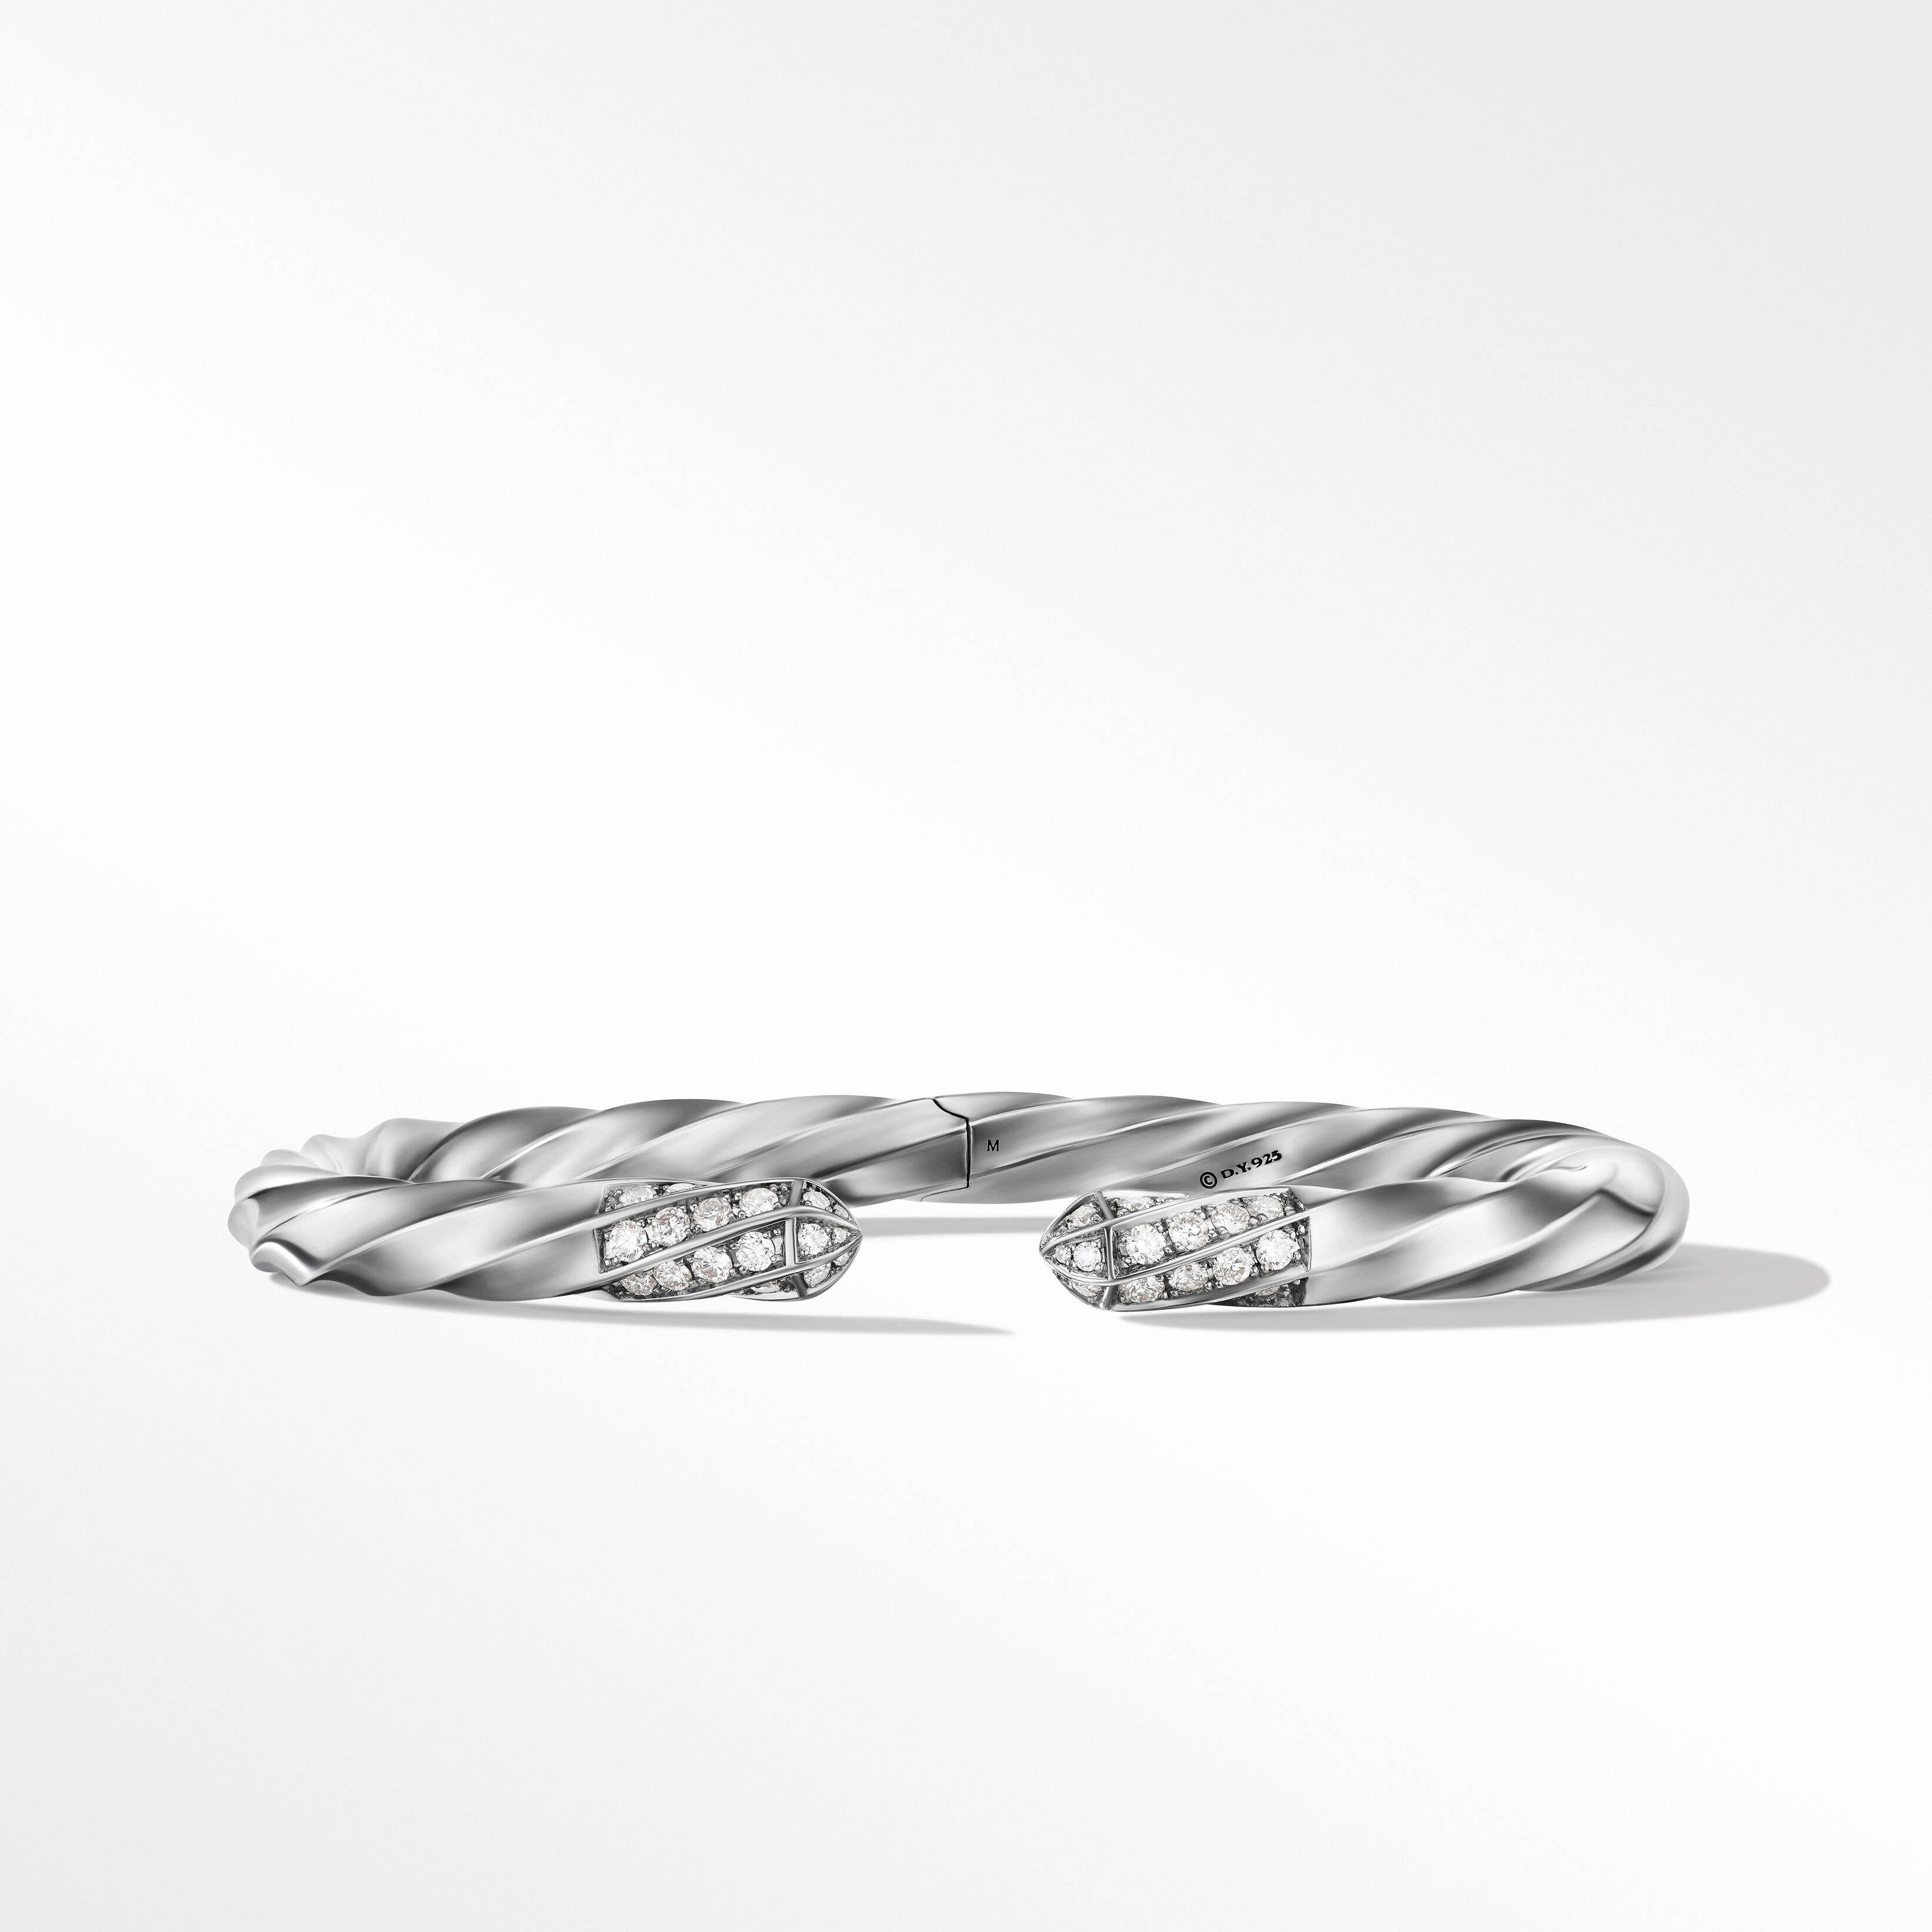 Cable Edge Bracelet in Recycled Sterling Silver with Diamonds, 5.5mm